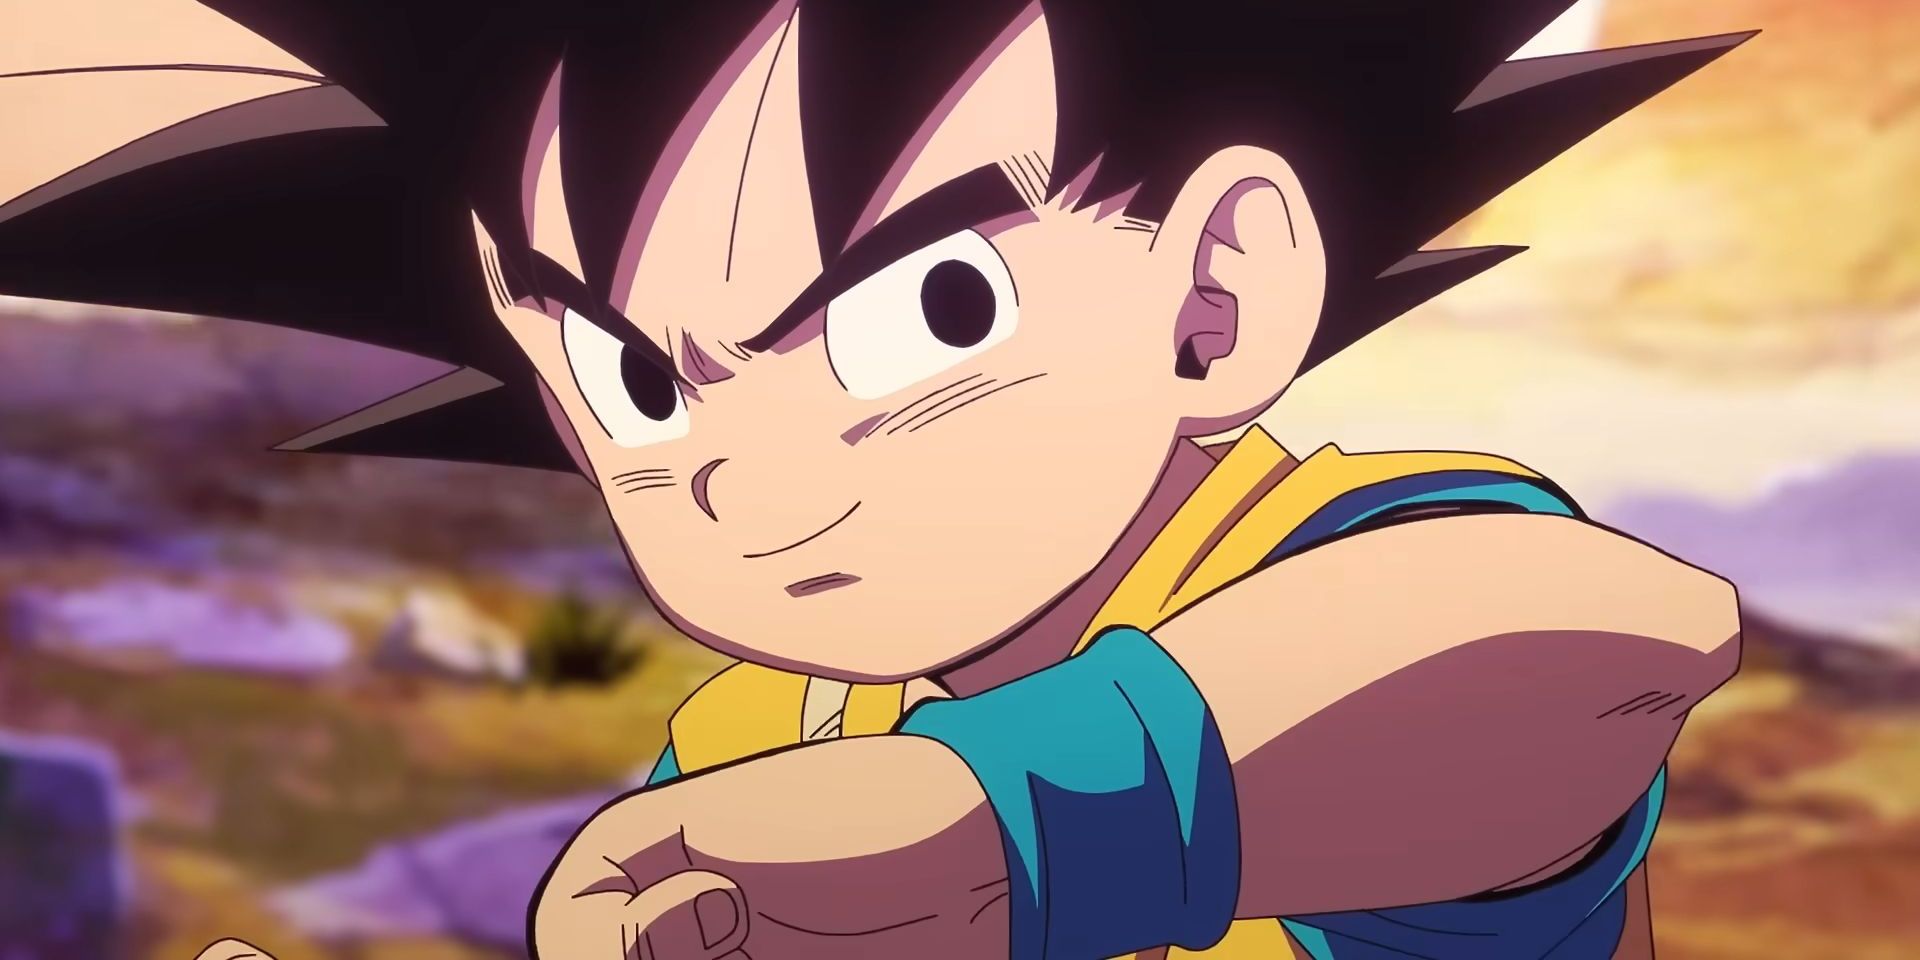 Dragon Ball Daima release date and episode numbers